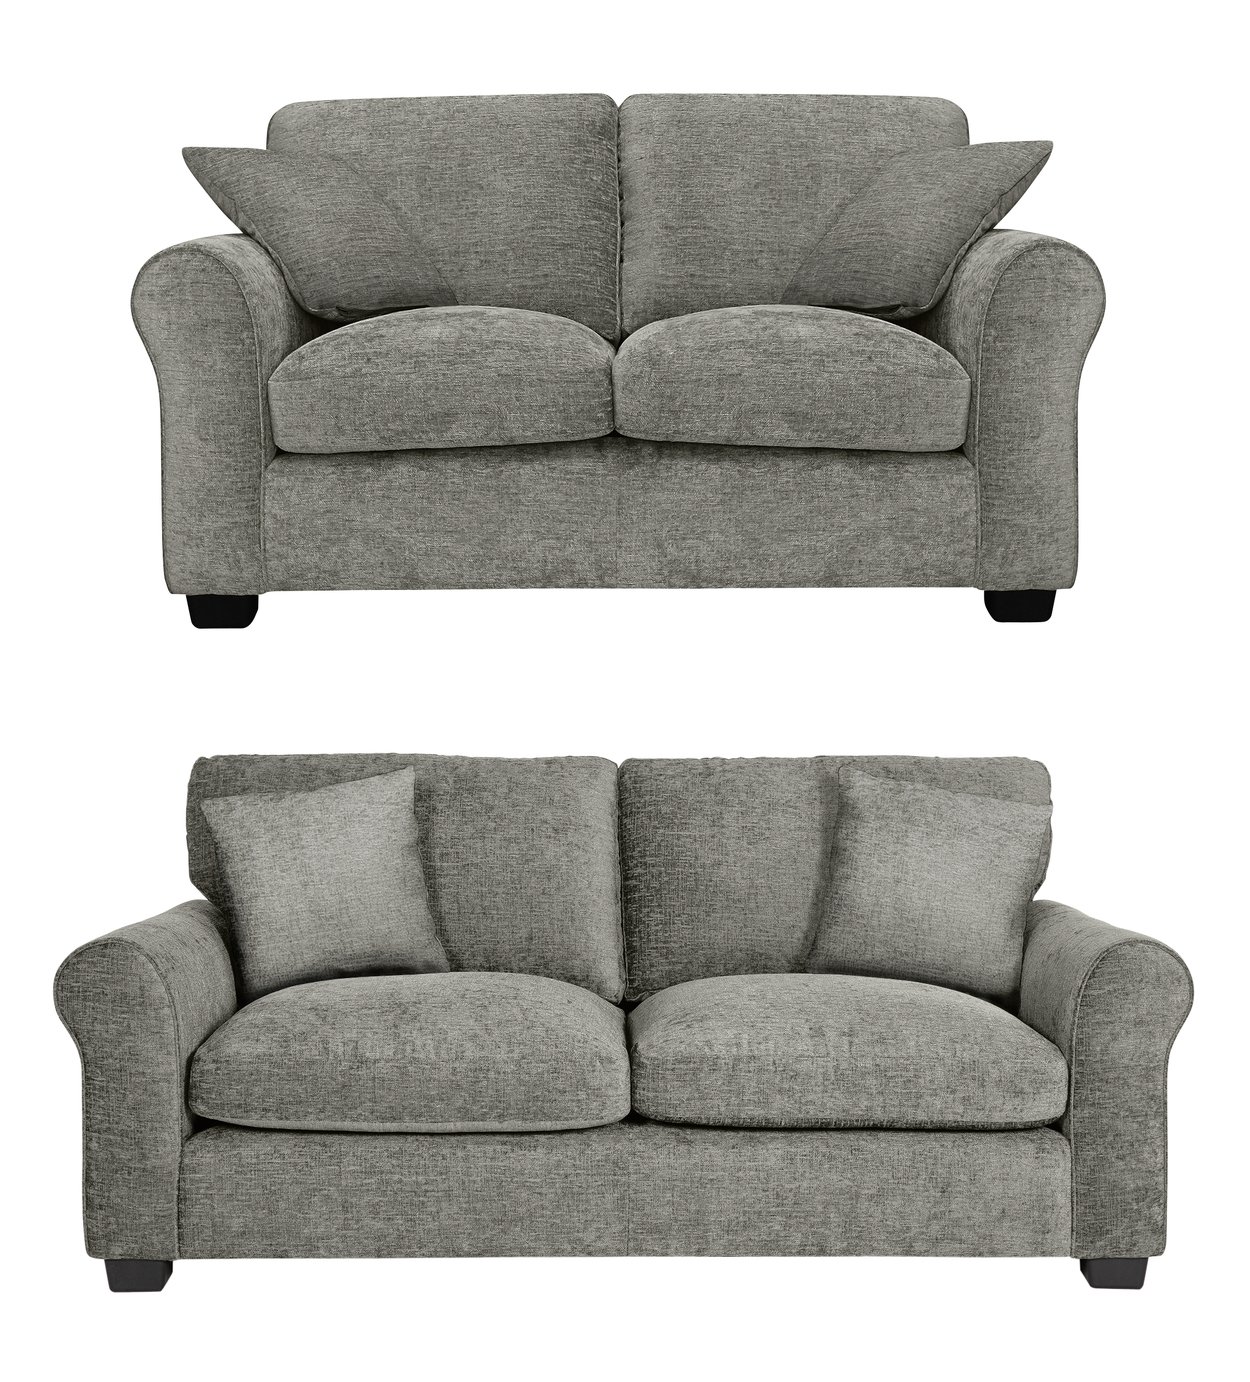 Argos Home Tammy Fabric 2 Seater and 3 Seater Sofa - Mink